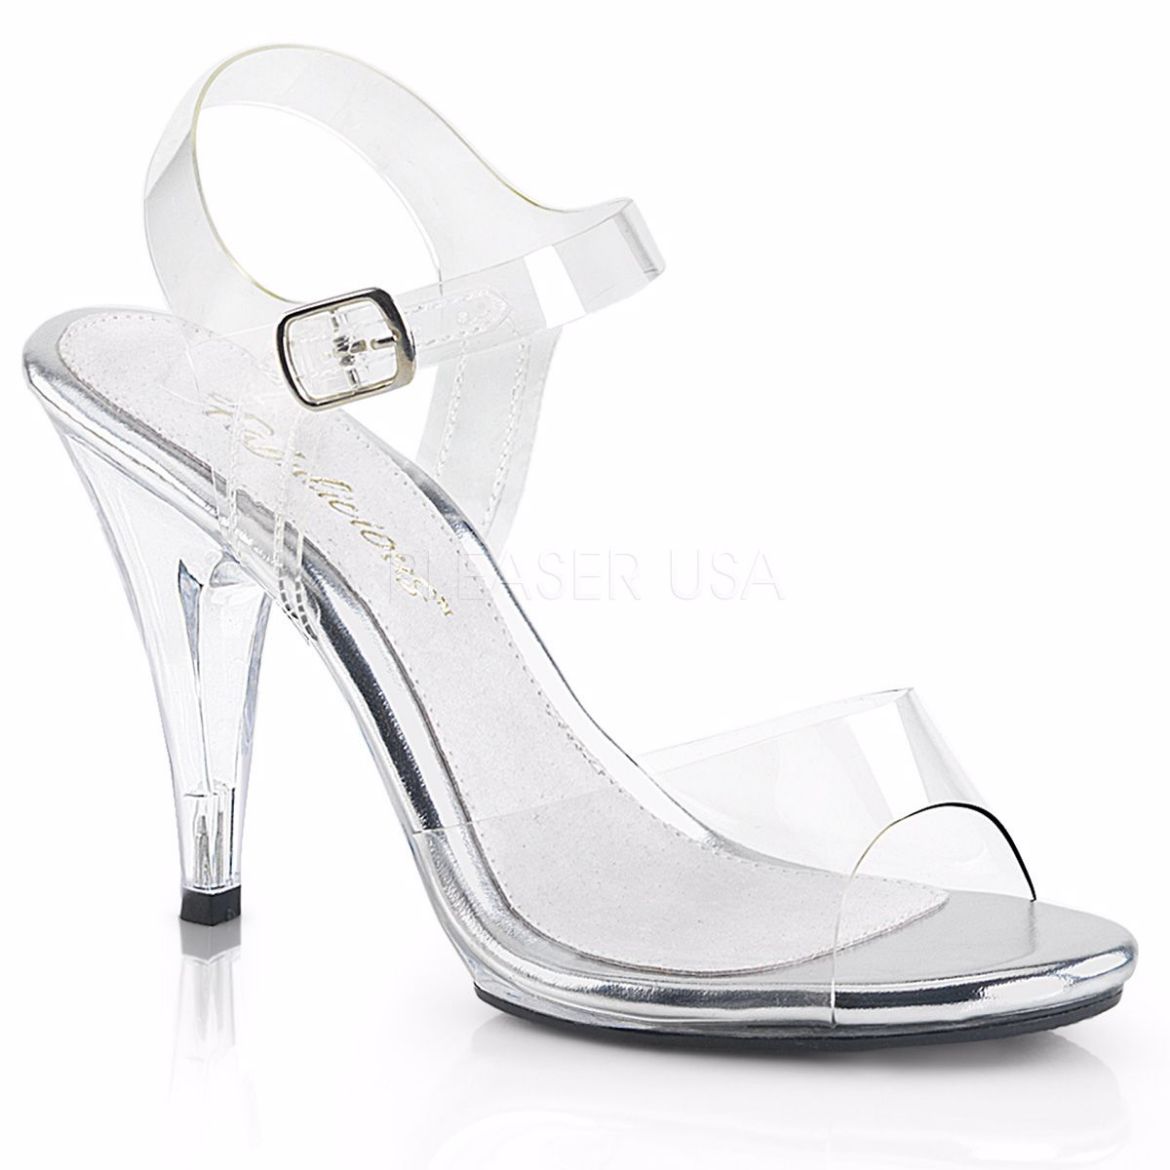 Product image of Fabulicious Caress-408 Clear/Clear, 4 inch (10.2 cm) Heel, 1/8 inch (0.3 cm) Platform Sandal Shoes